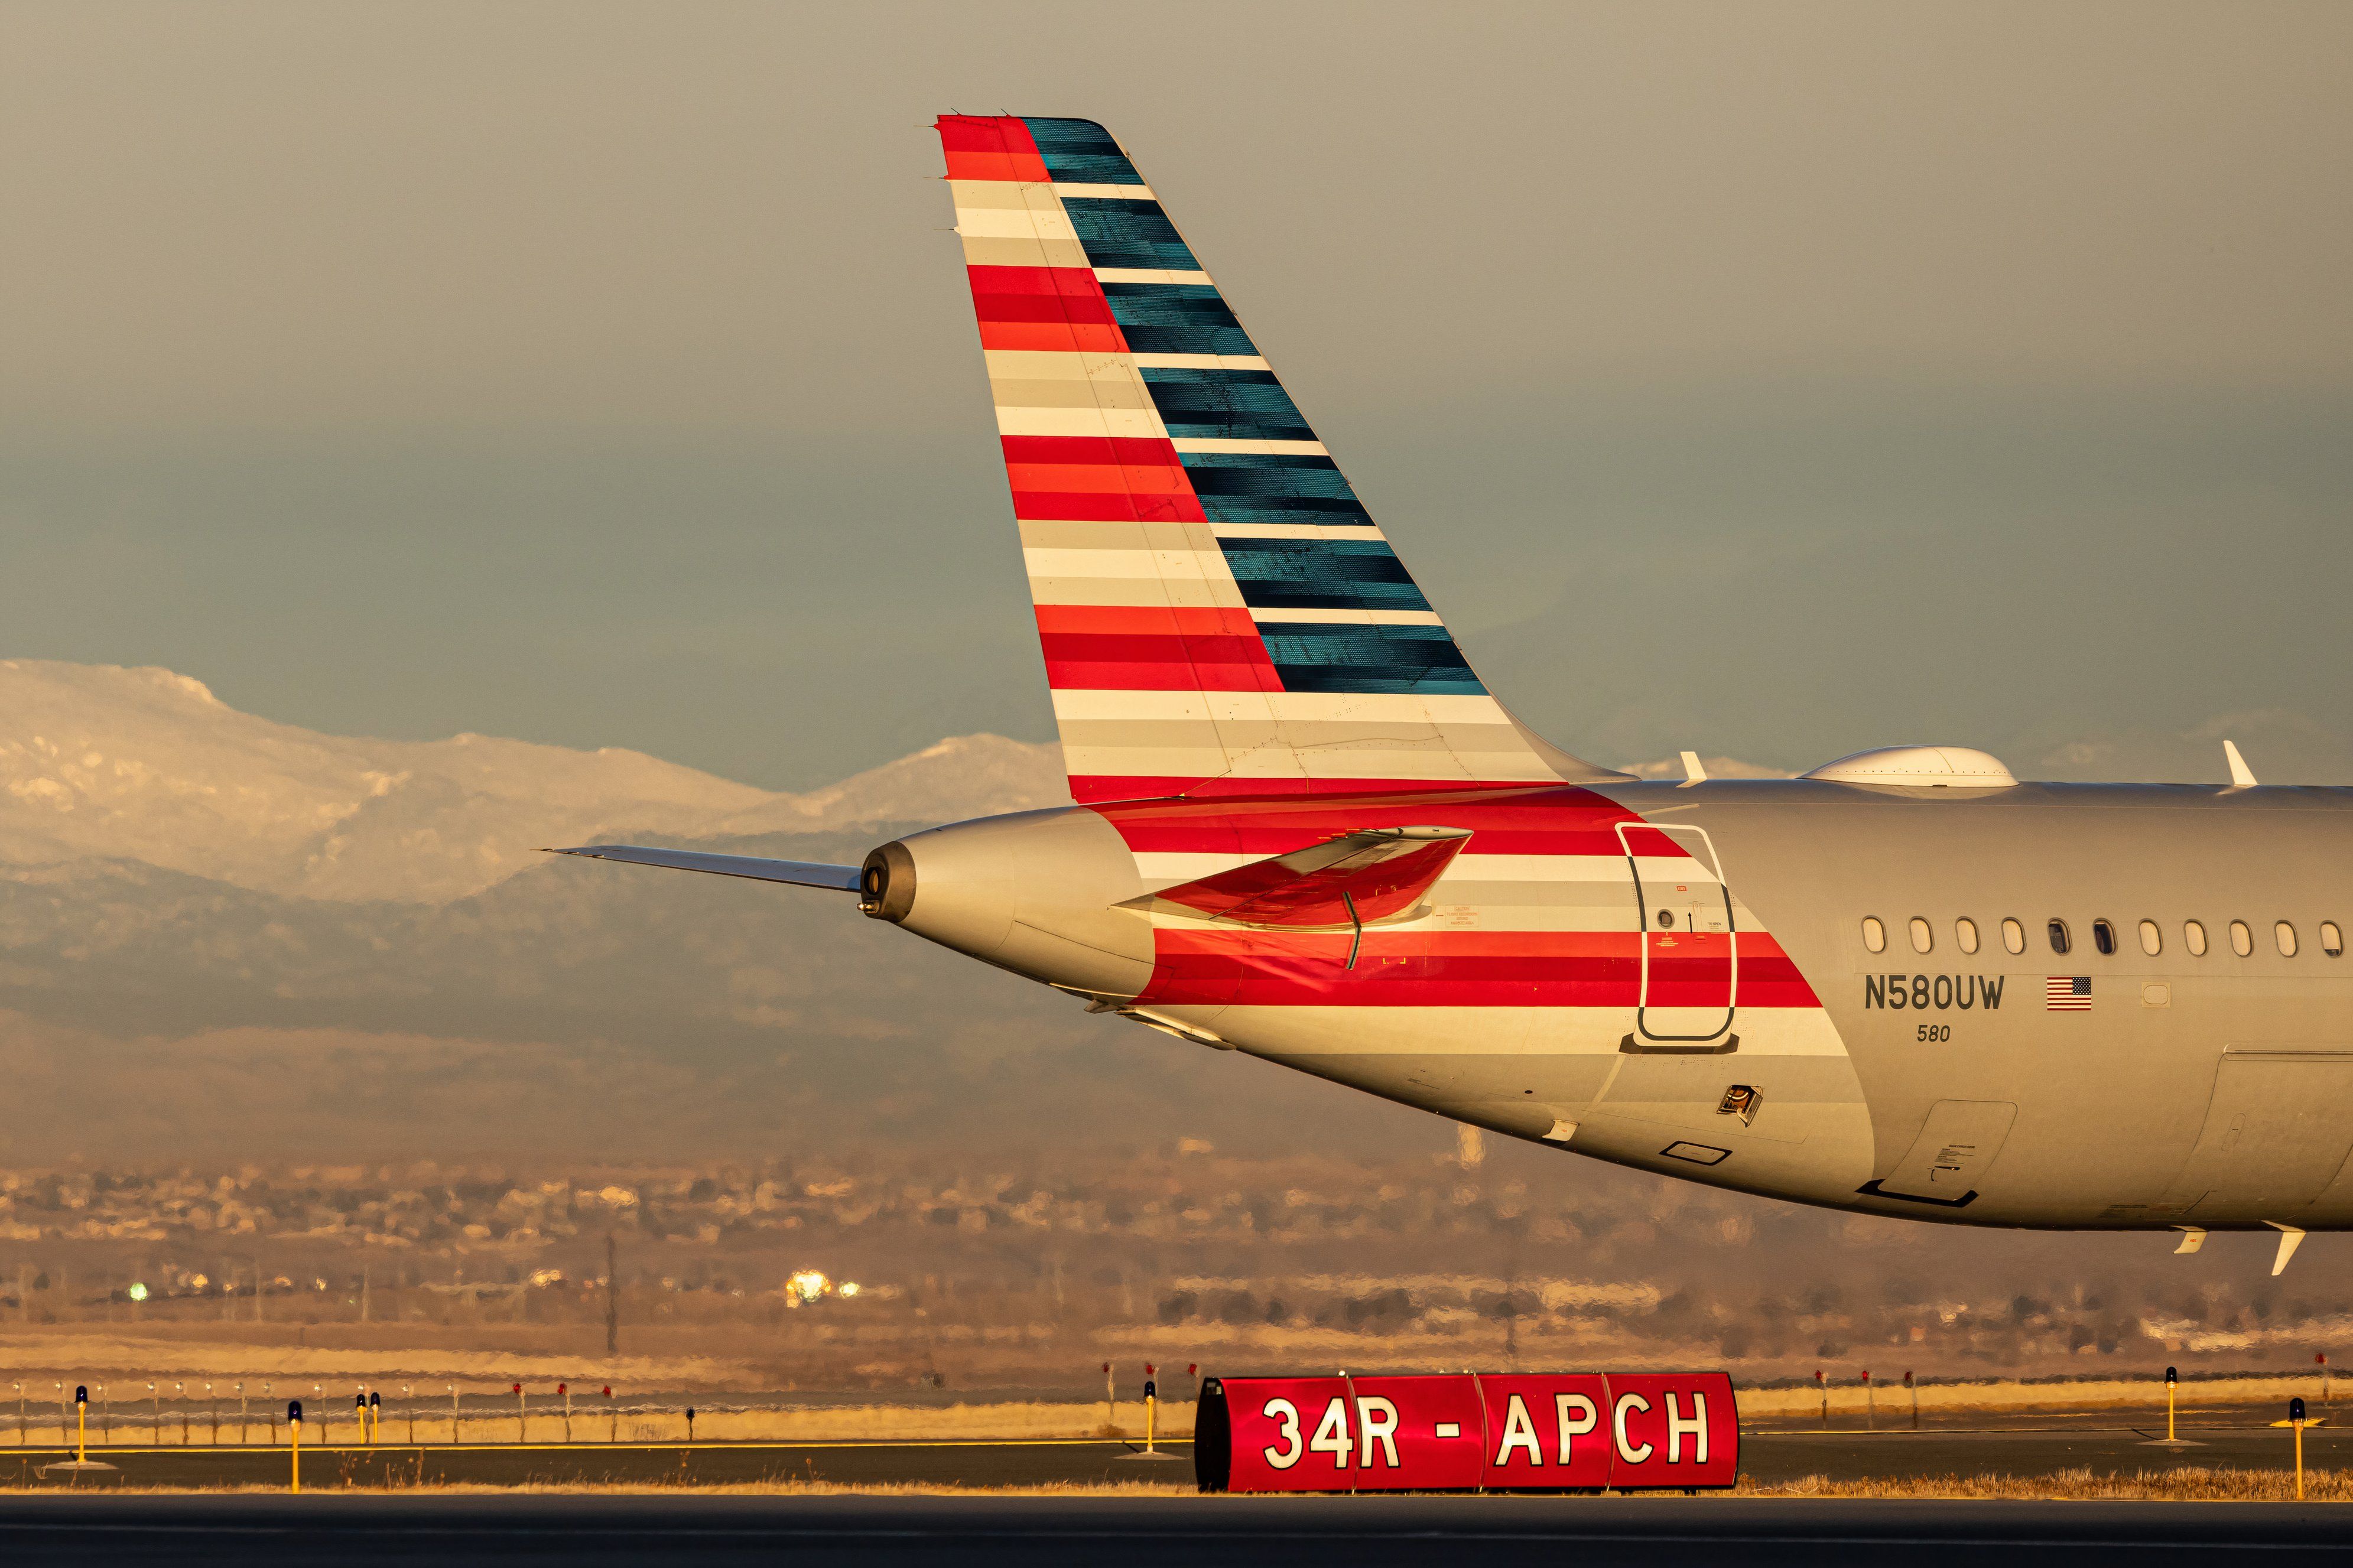 An American Airlines plane at Denver International Airport